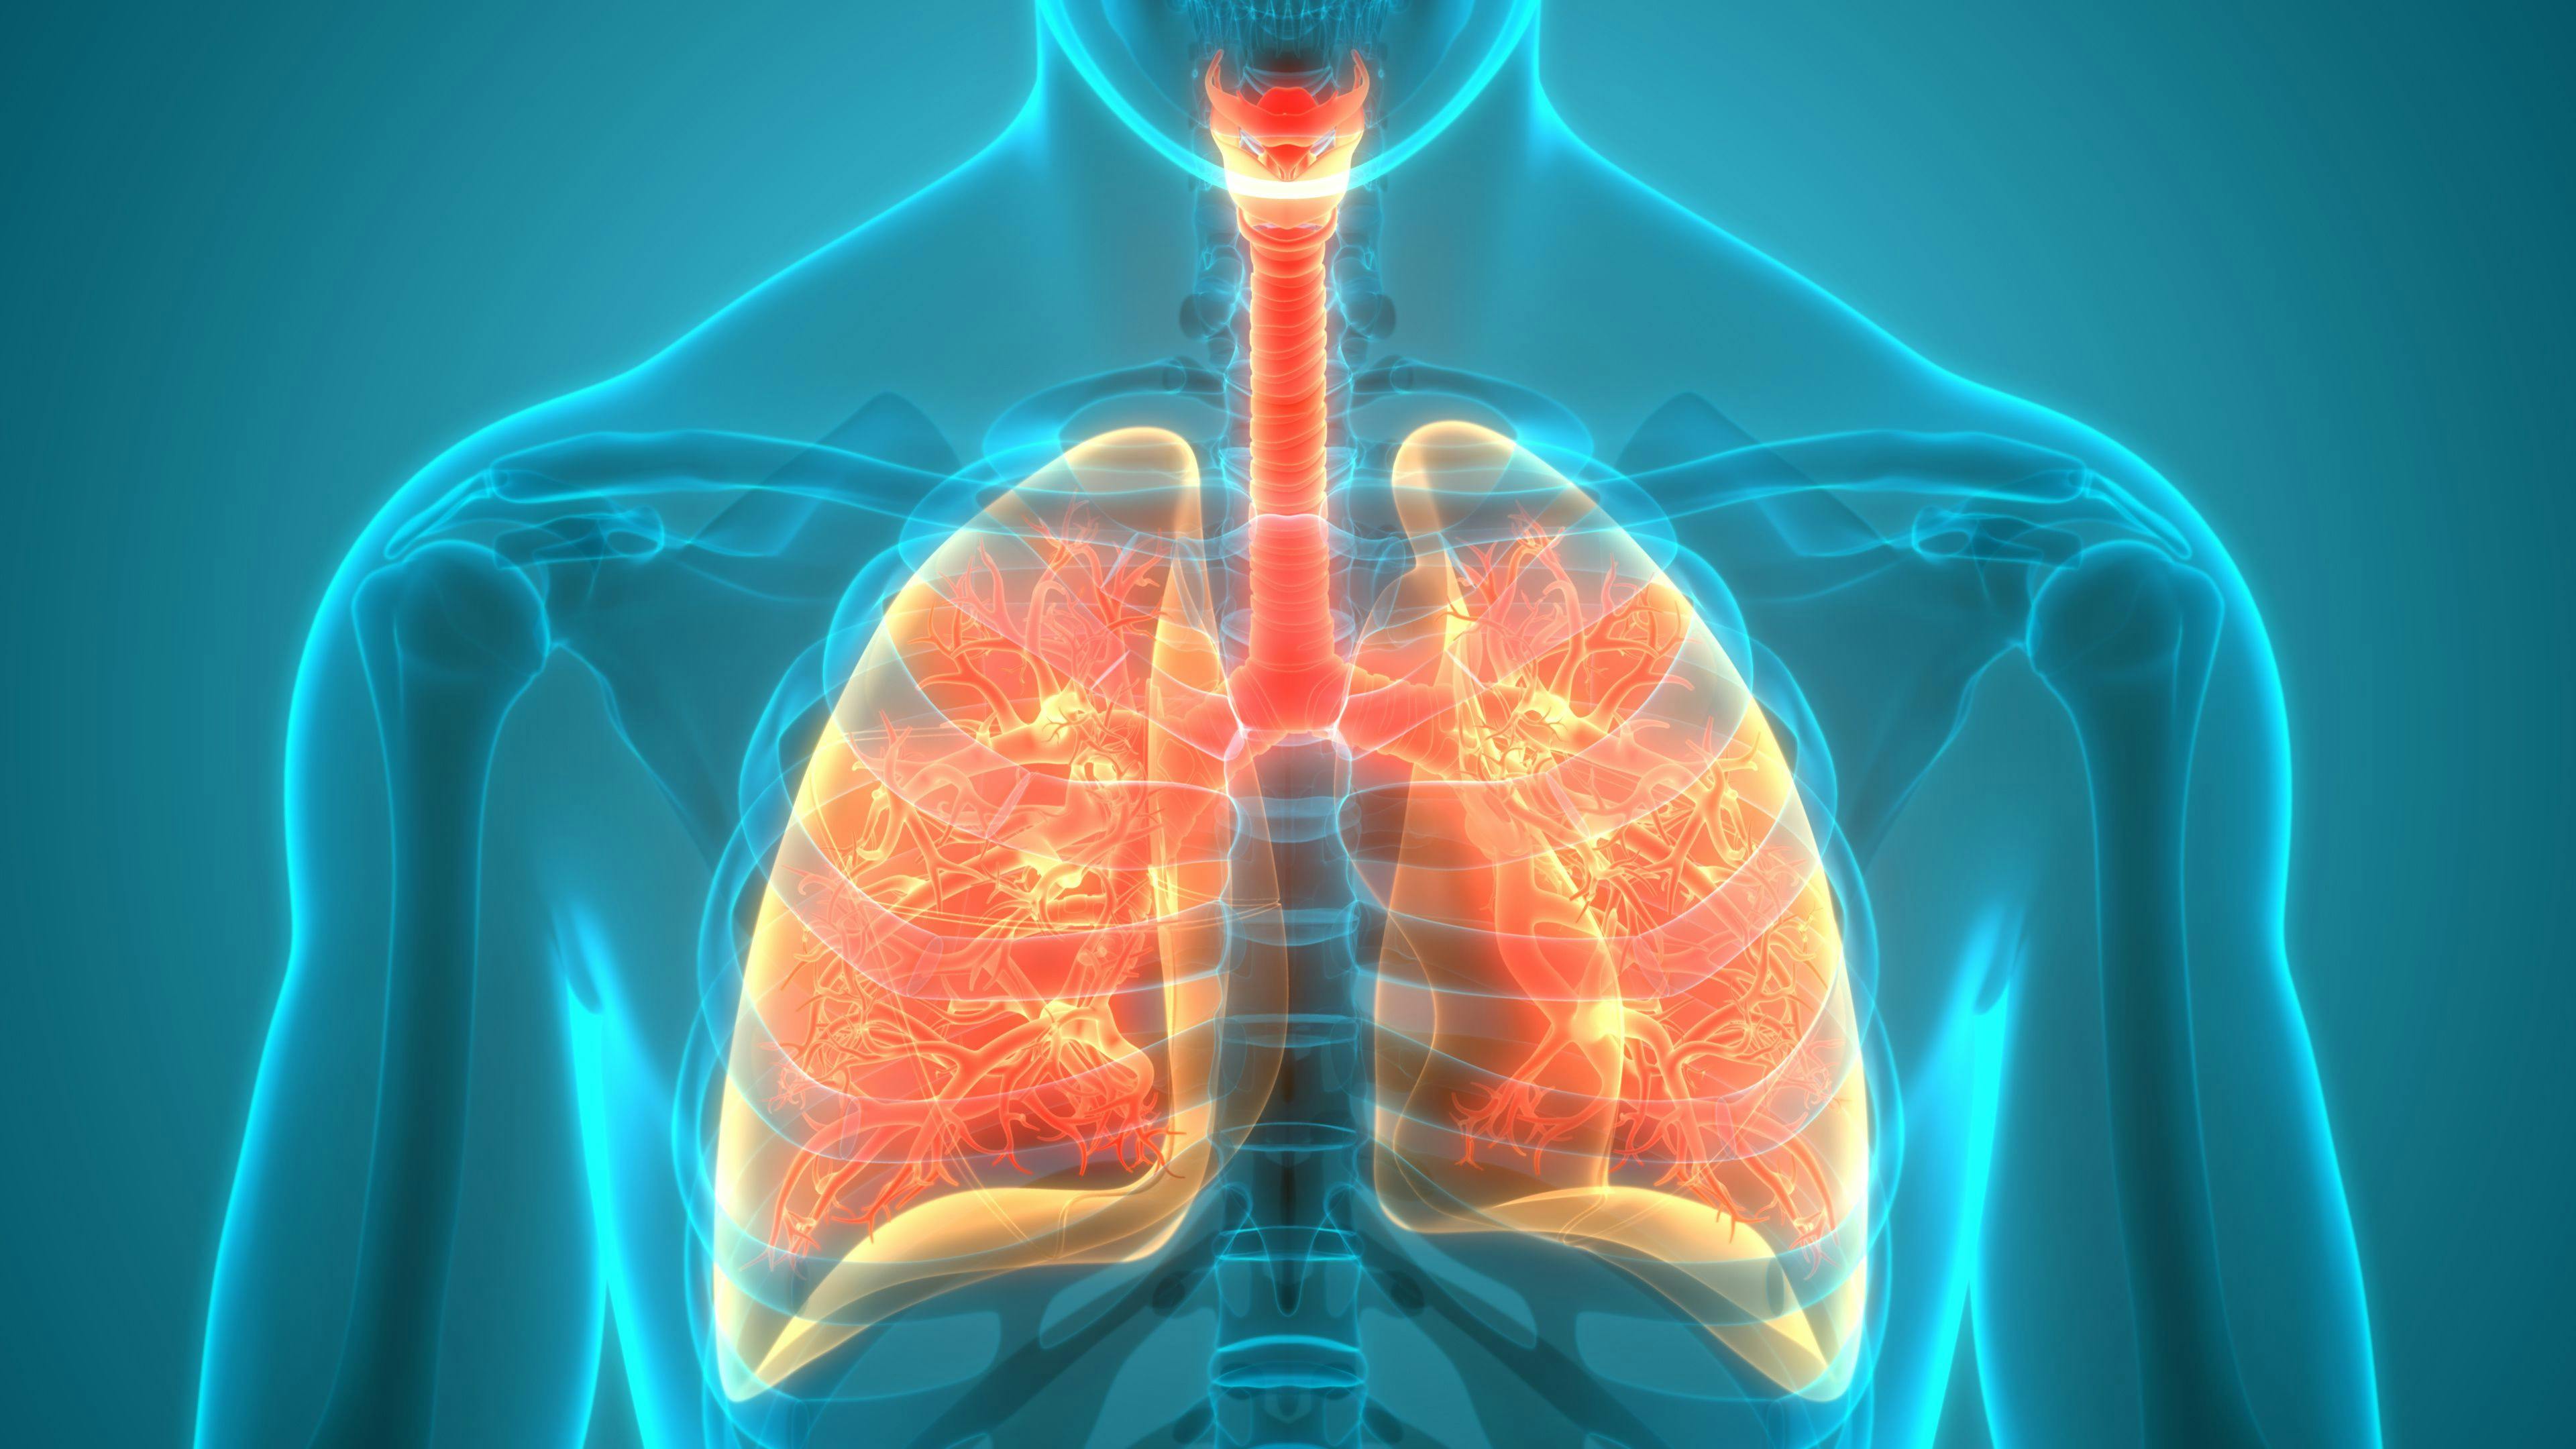 Data Analysis Shows Promise for Tezepelumab-ekko in Patients With Severe Asthma